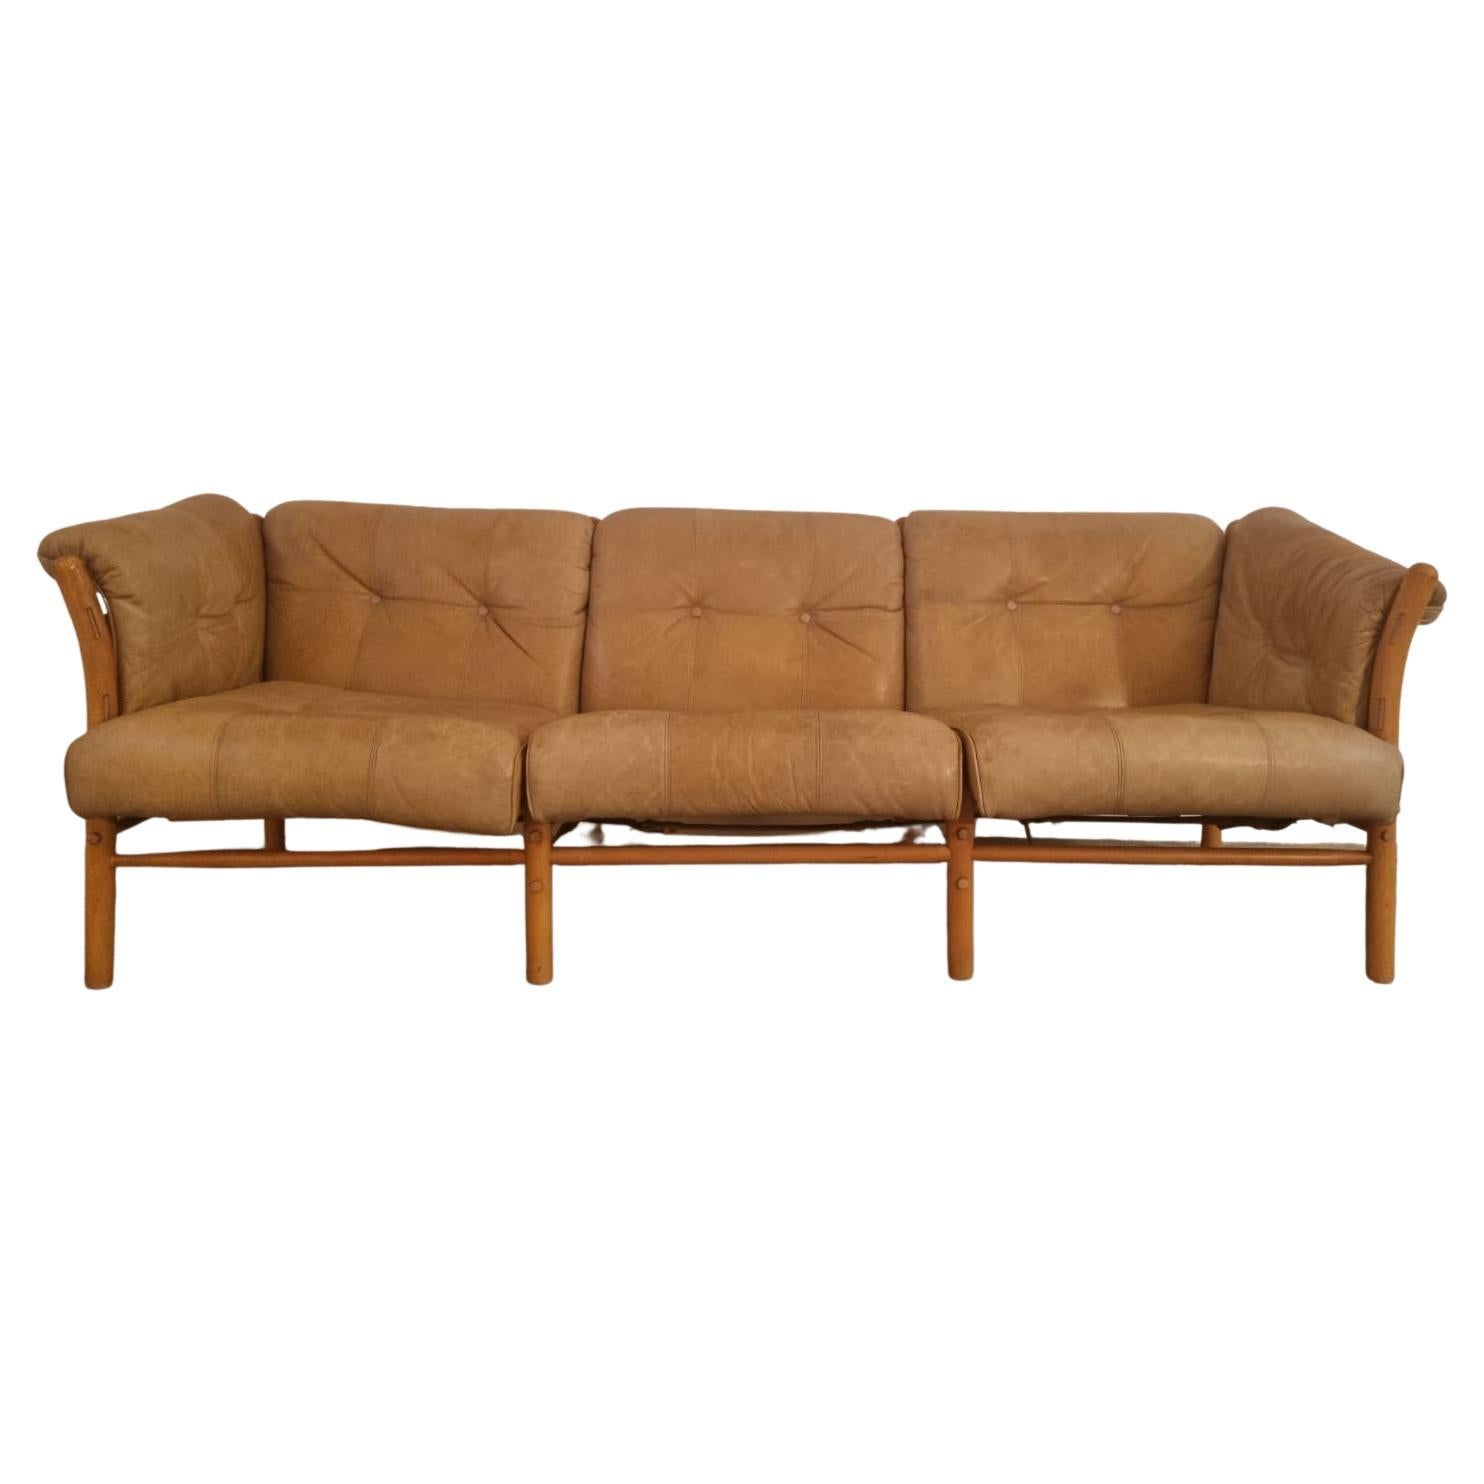 Arne Norell Three Seater Leather Sofa, 1970s For Sale